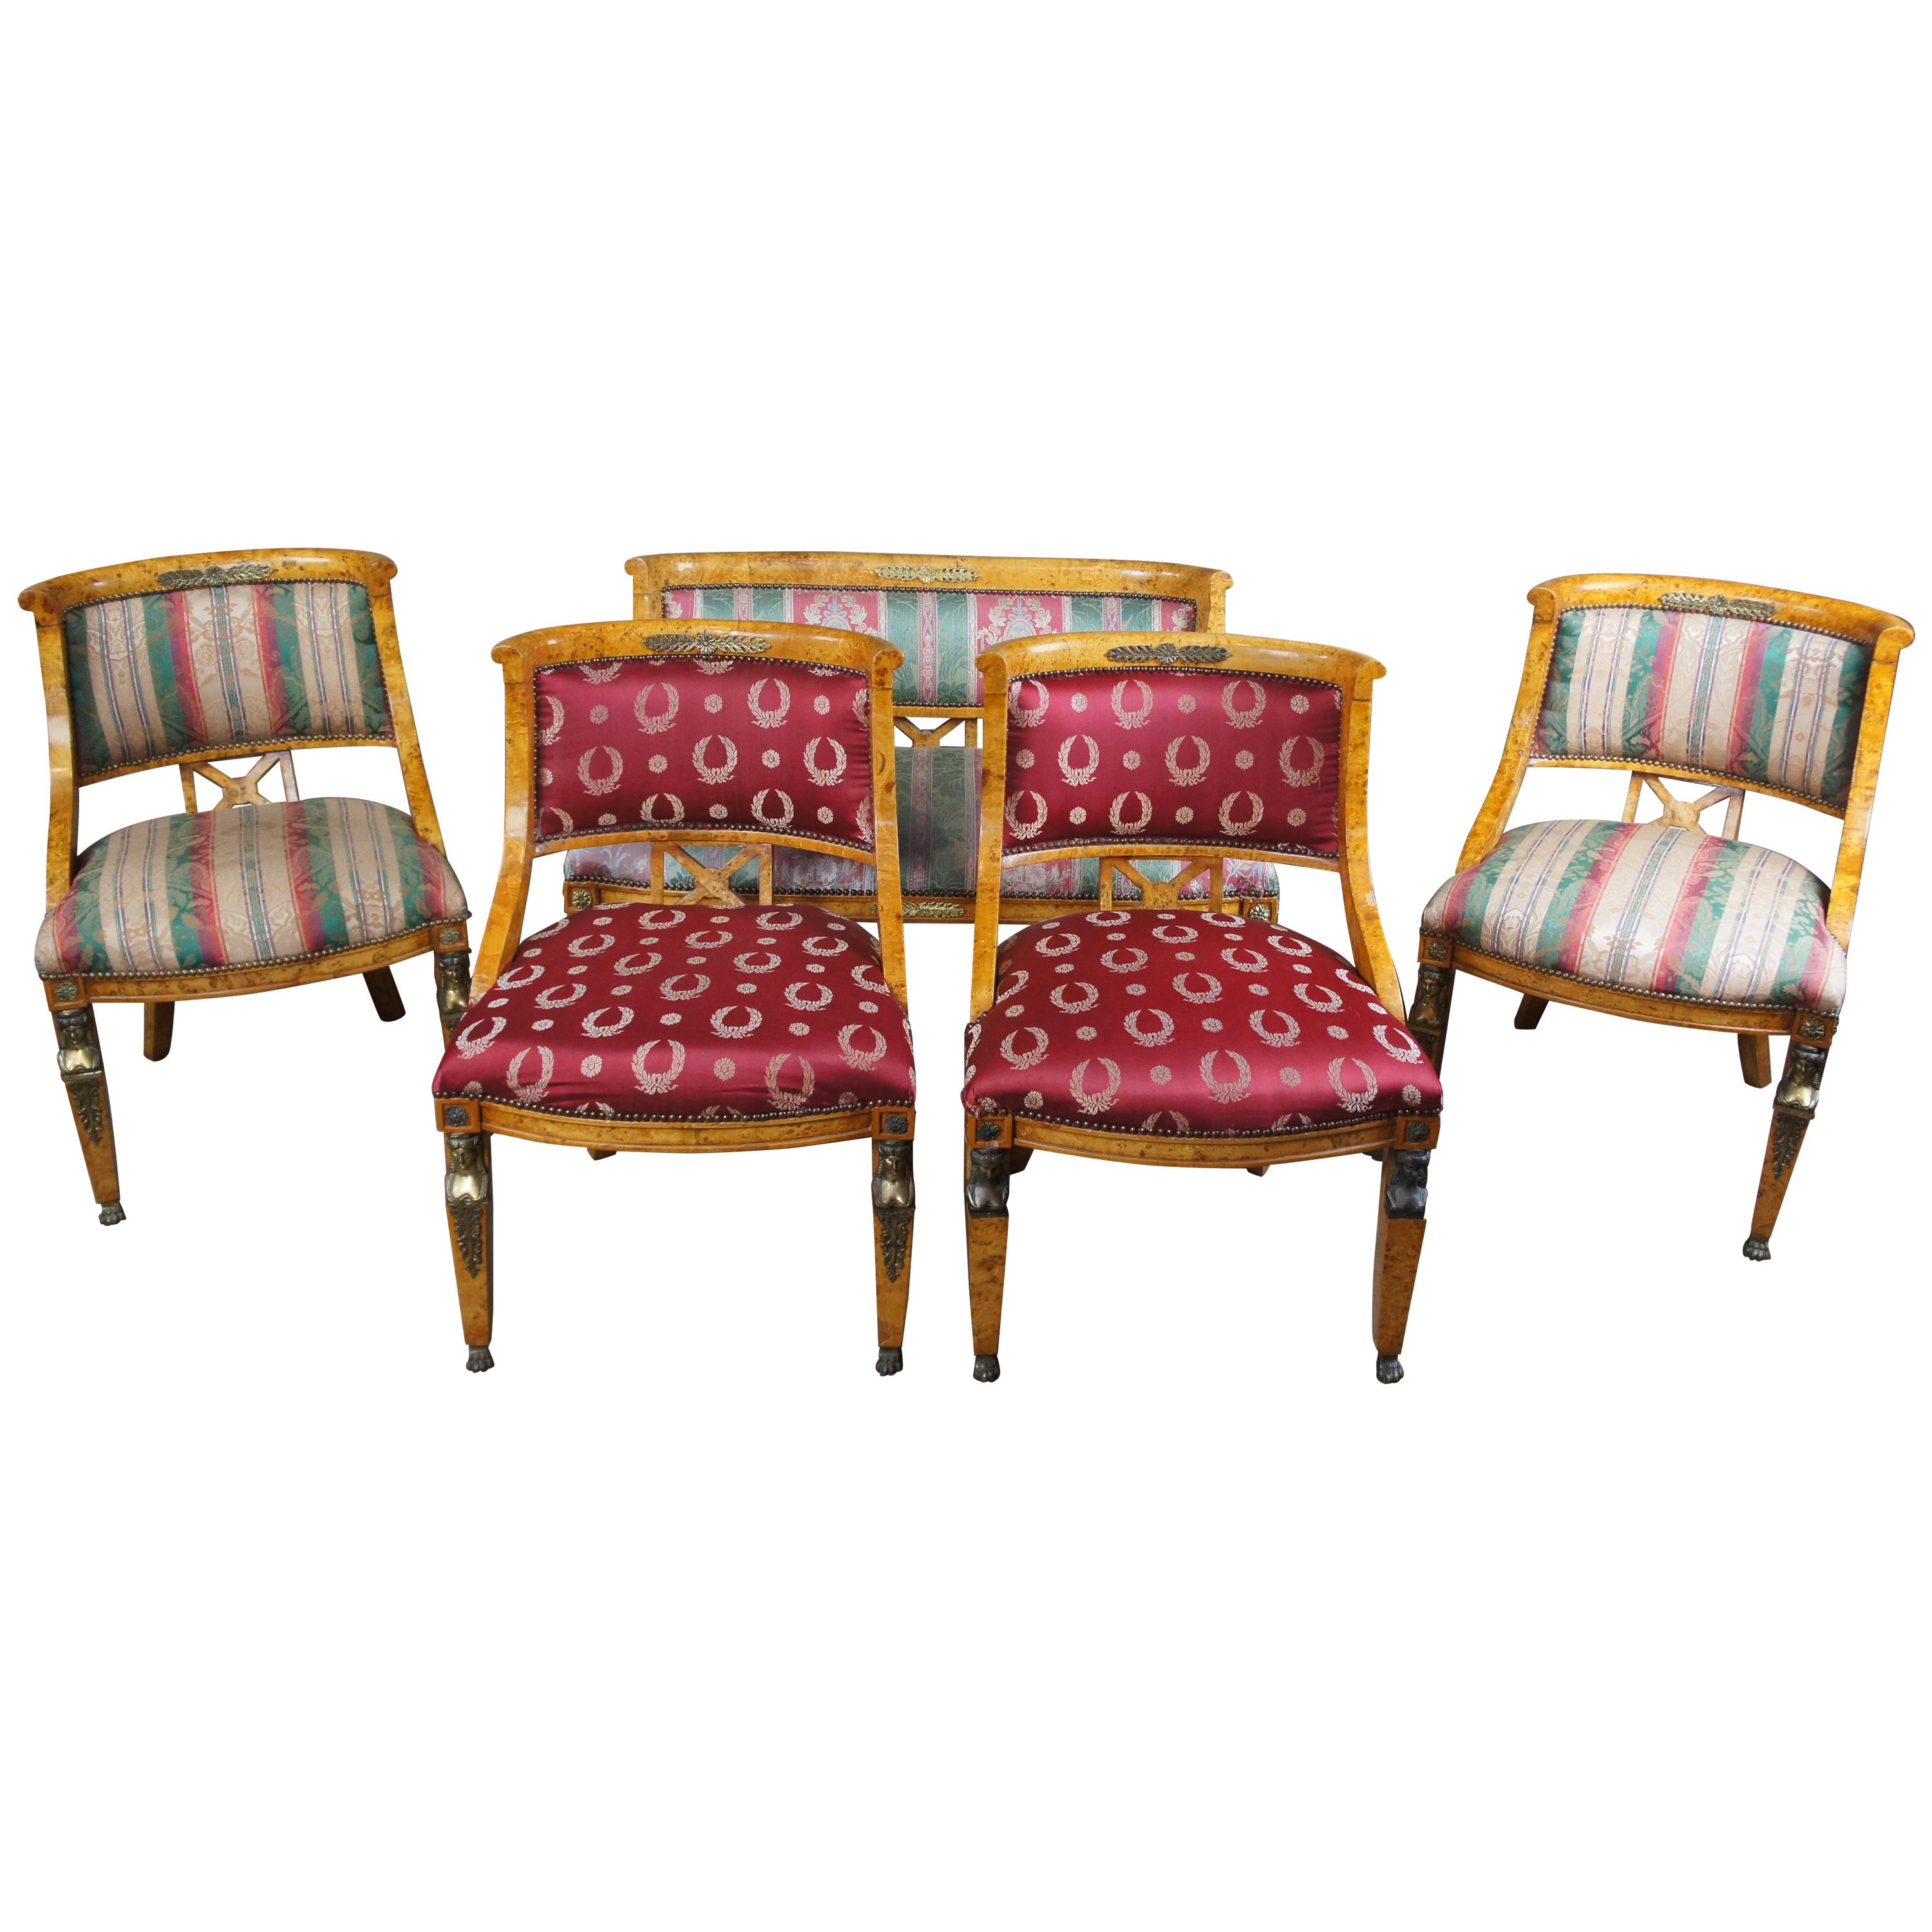 Antique Revival Olive Burlwood Parlor Set of 4 Chairs Settee Neoclassical